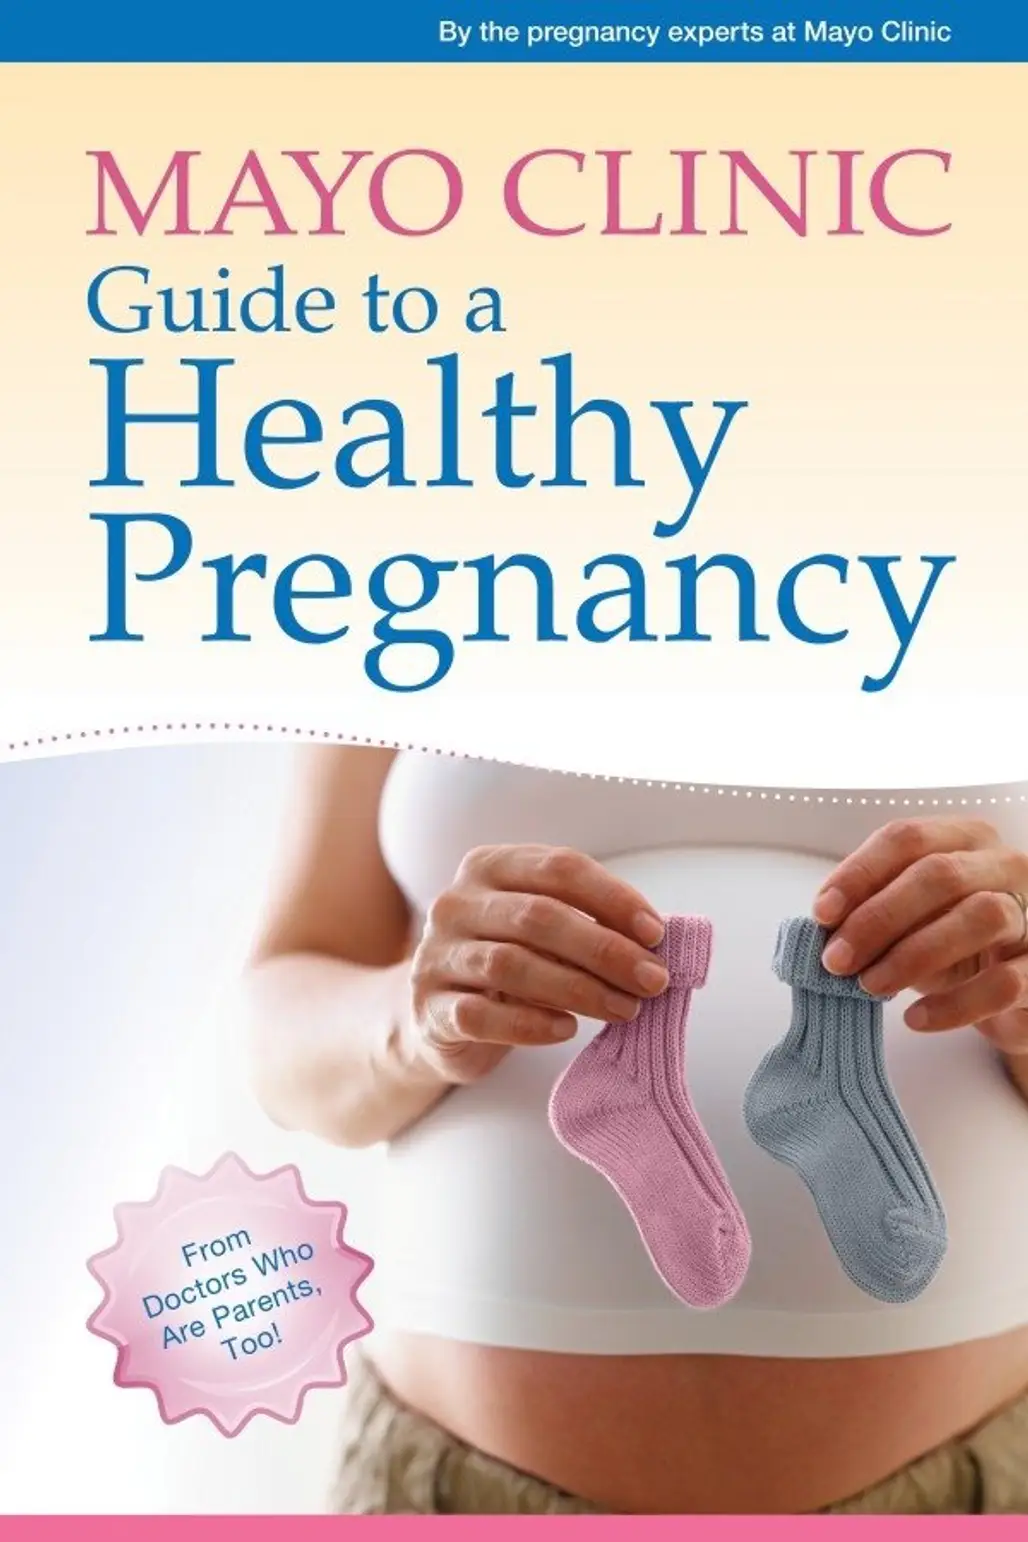 “Mayo Clinic Guide to a Healthy Pregnancy”